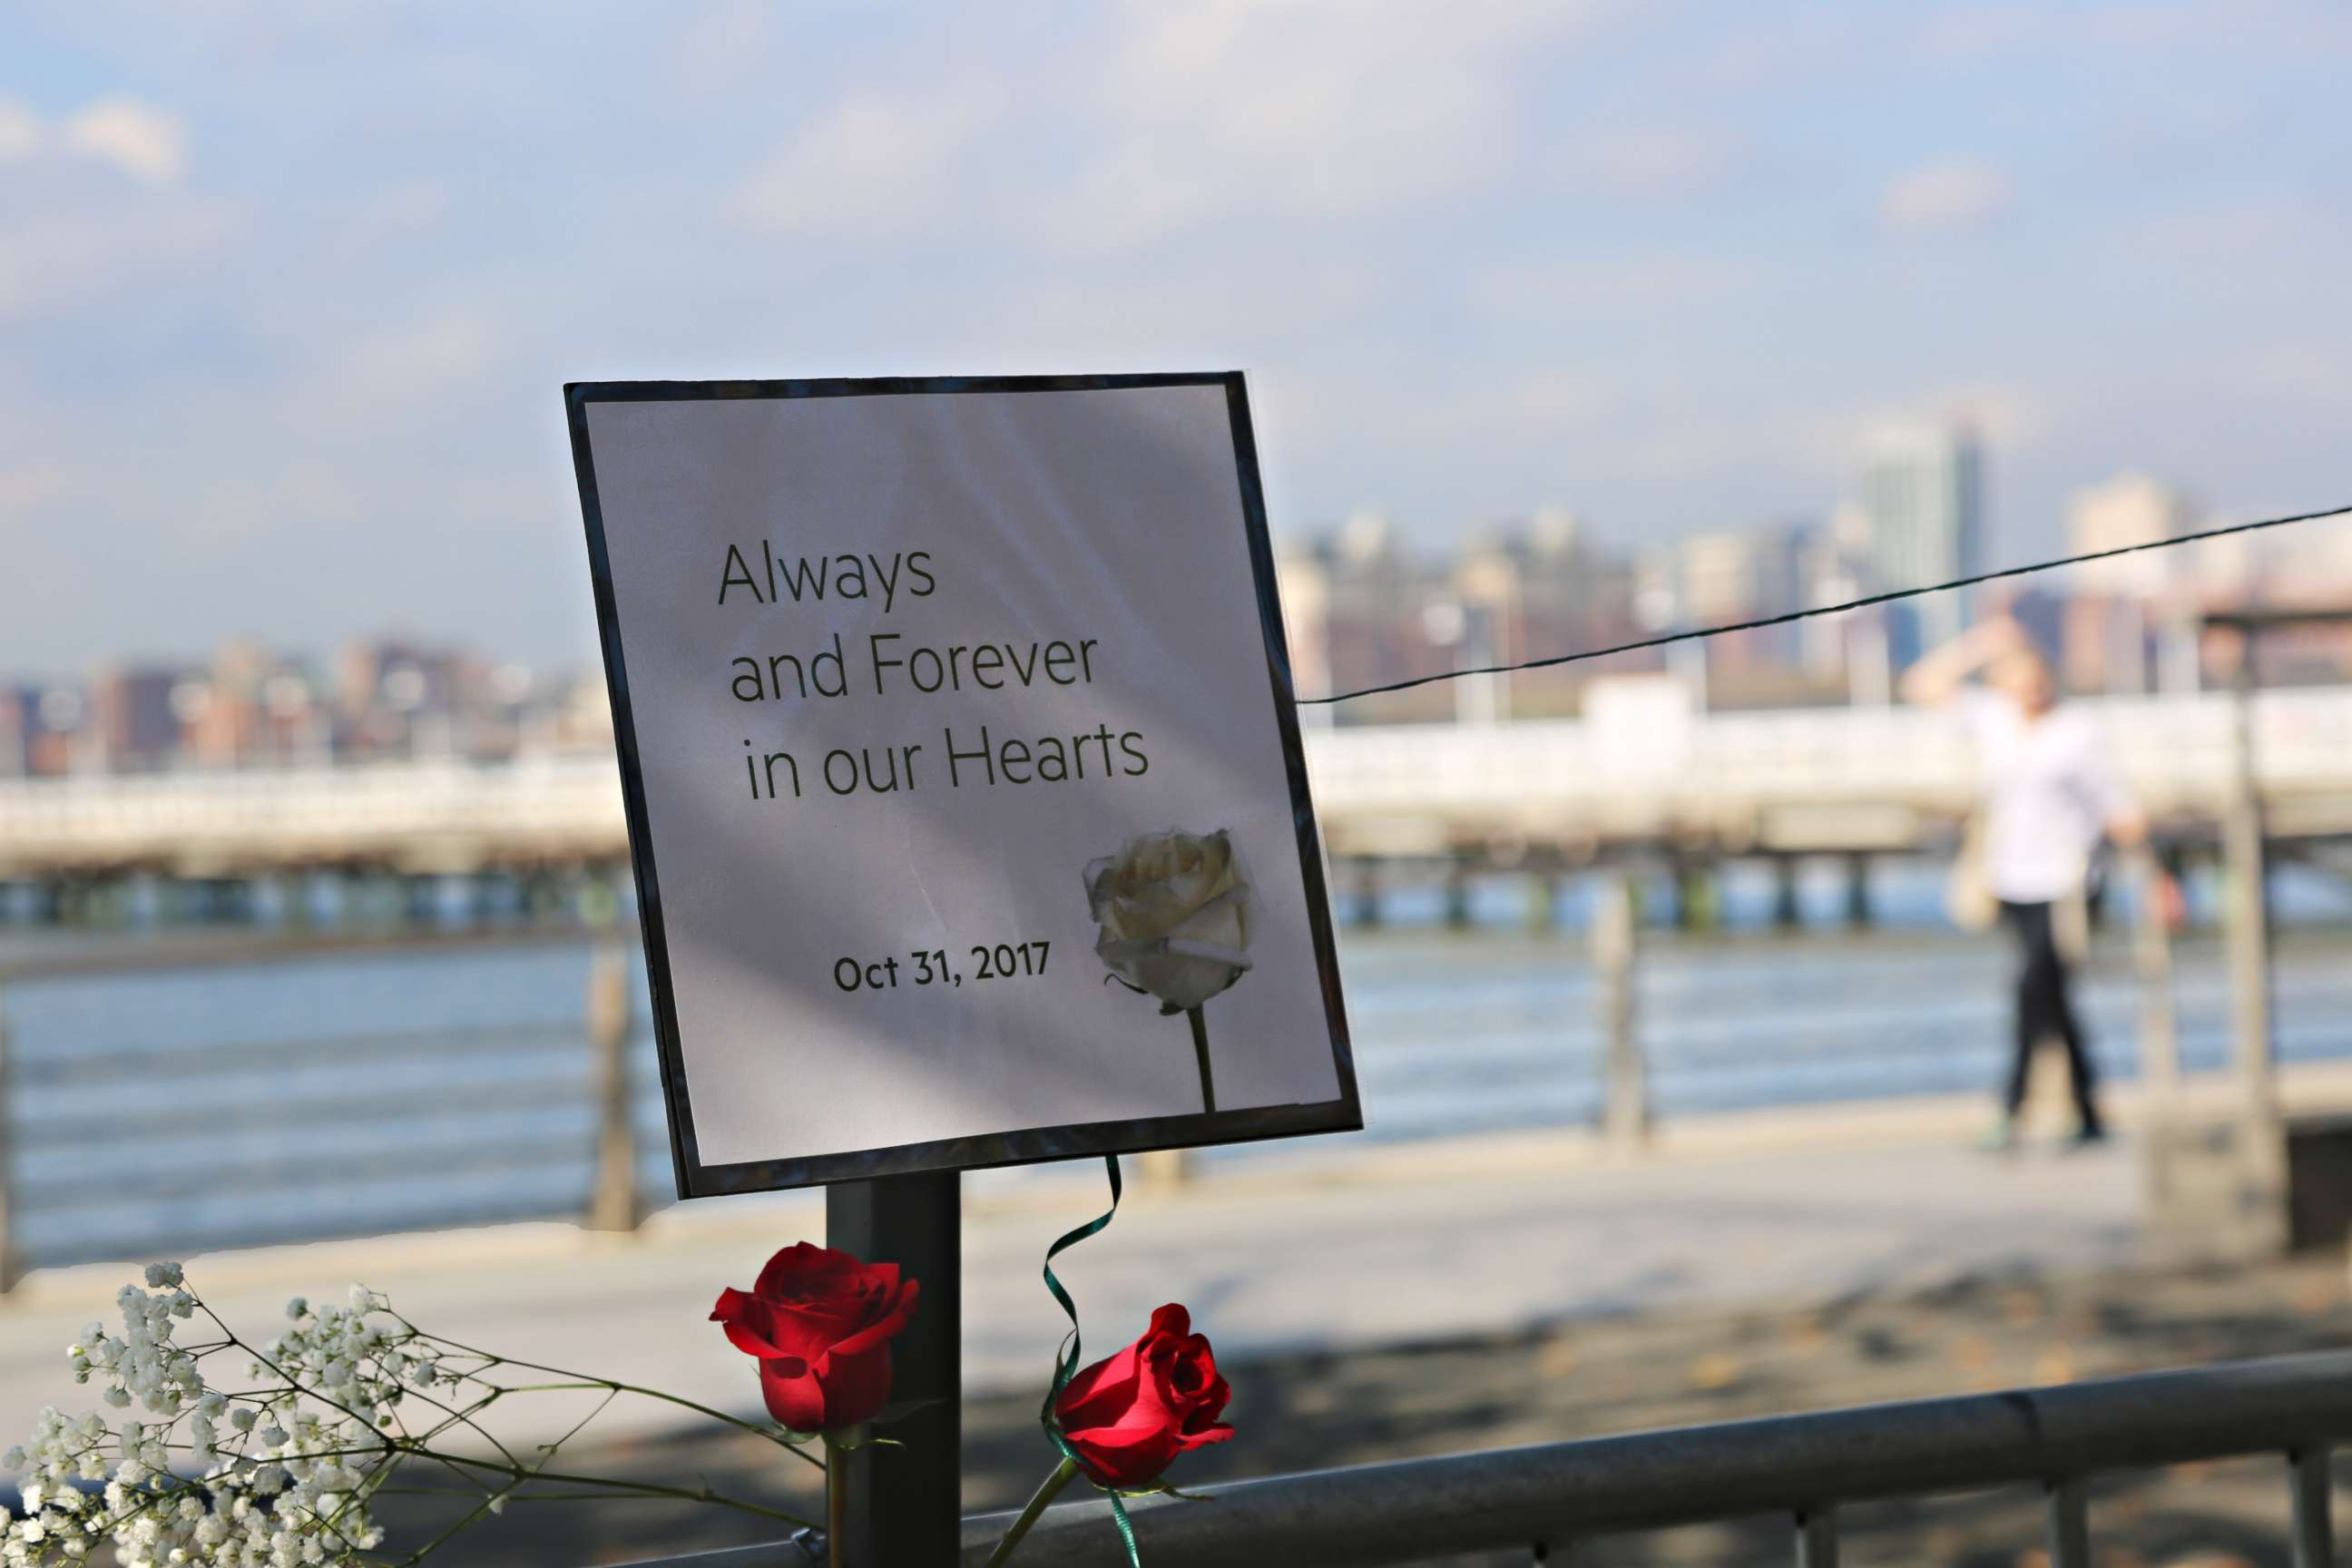 PHOTO: A memorial in lower Manhattan on Nov. 2, 2017, after the deadly terror attack on Oct. 31.